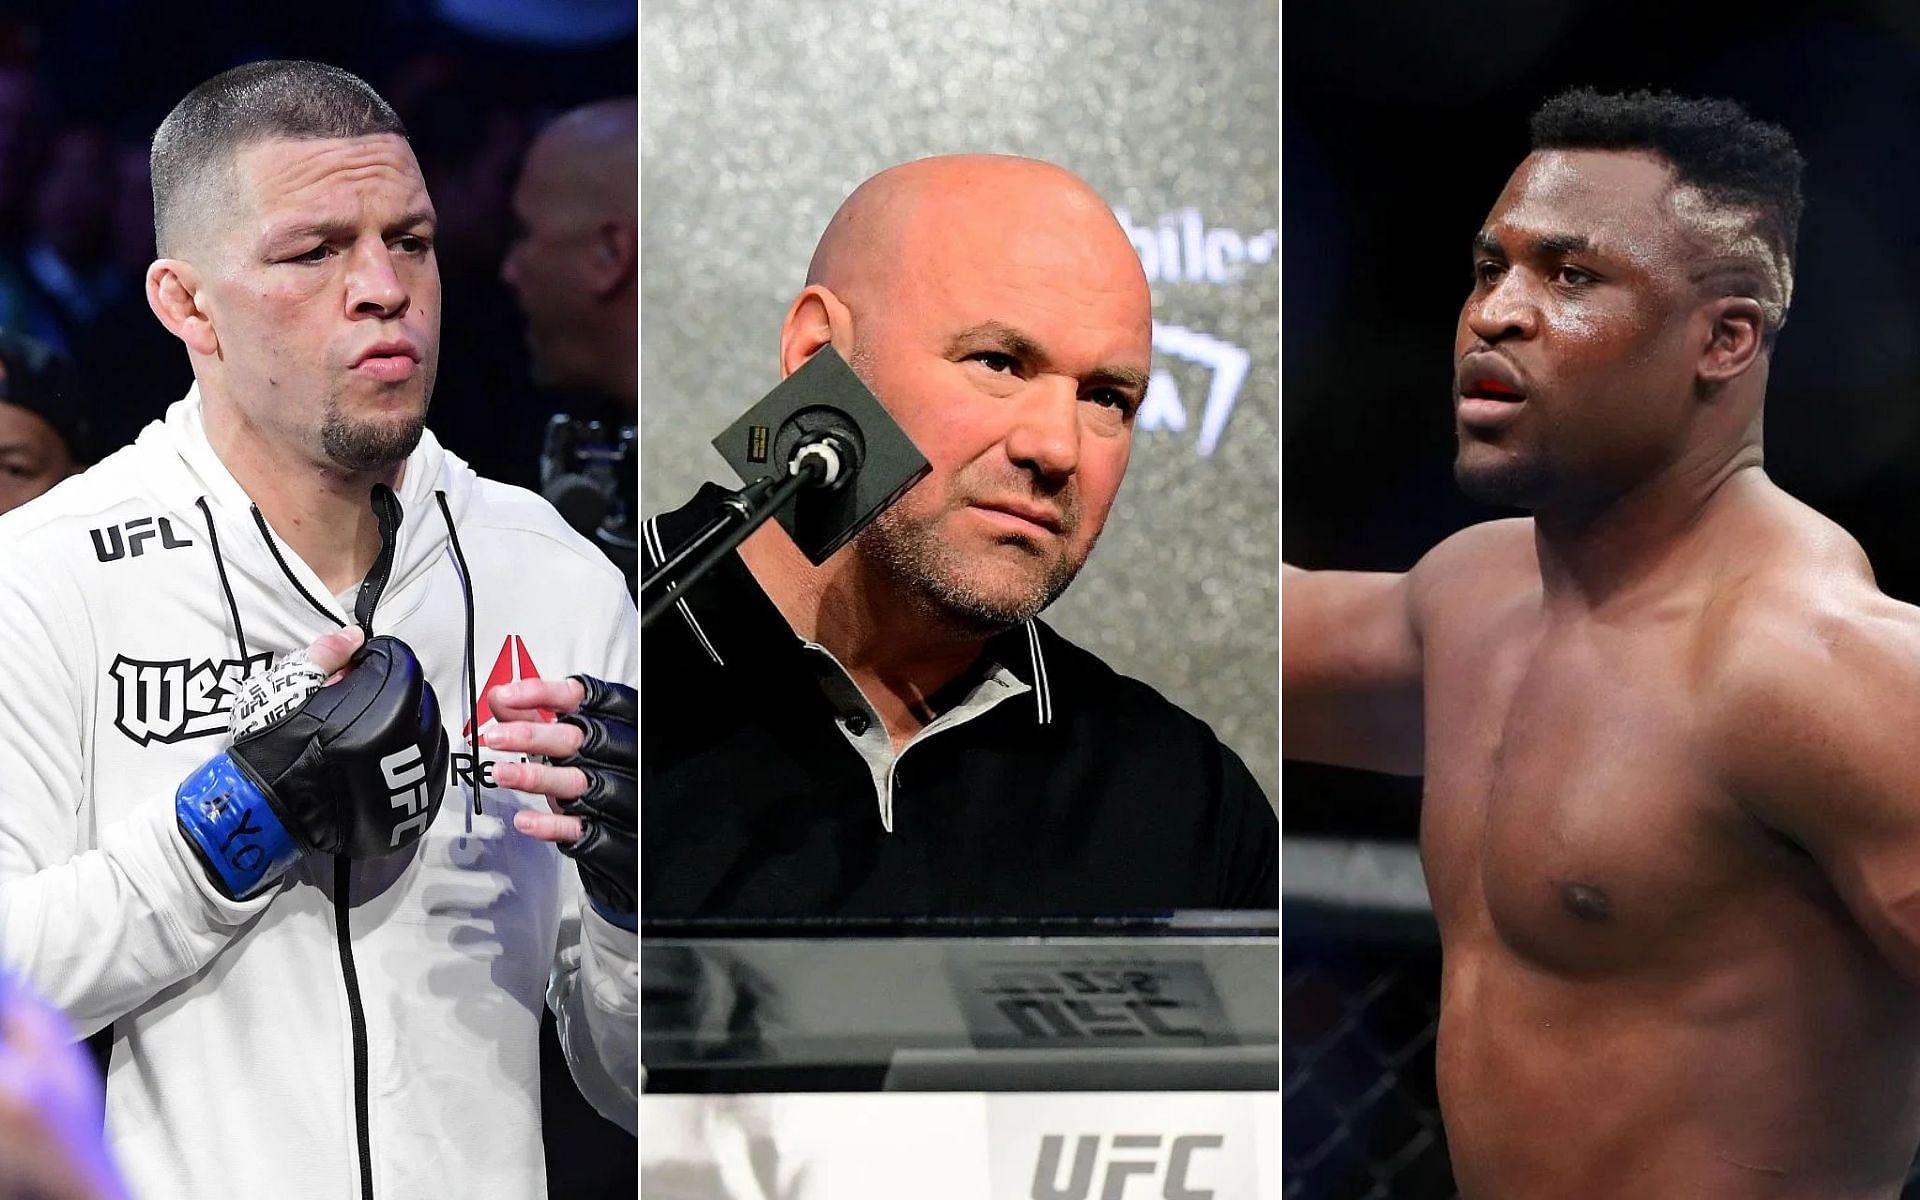 Nate Diaz (Left), Dana White (Middle), and Francis Ngannou (Right)